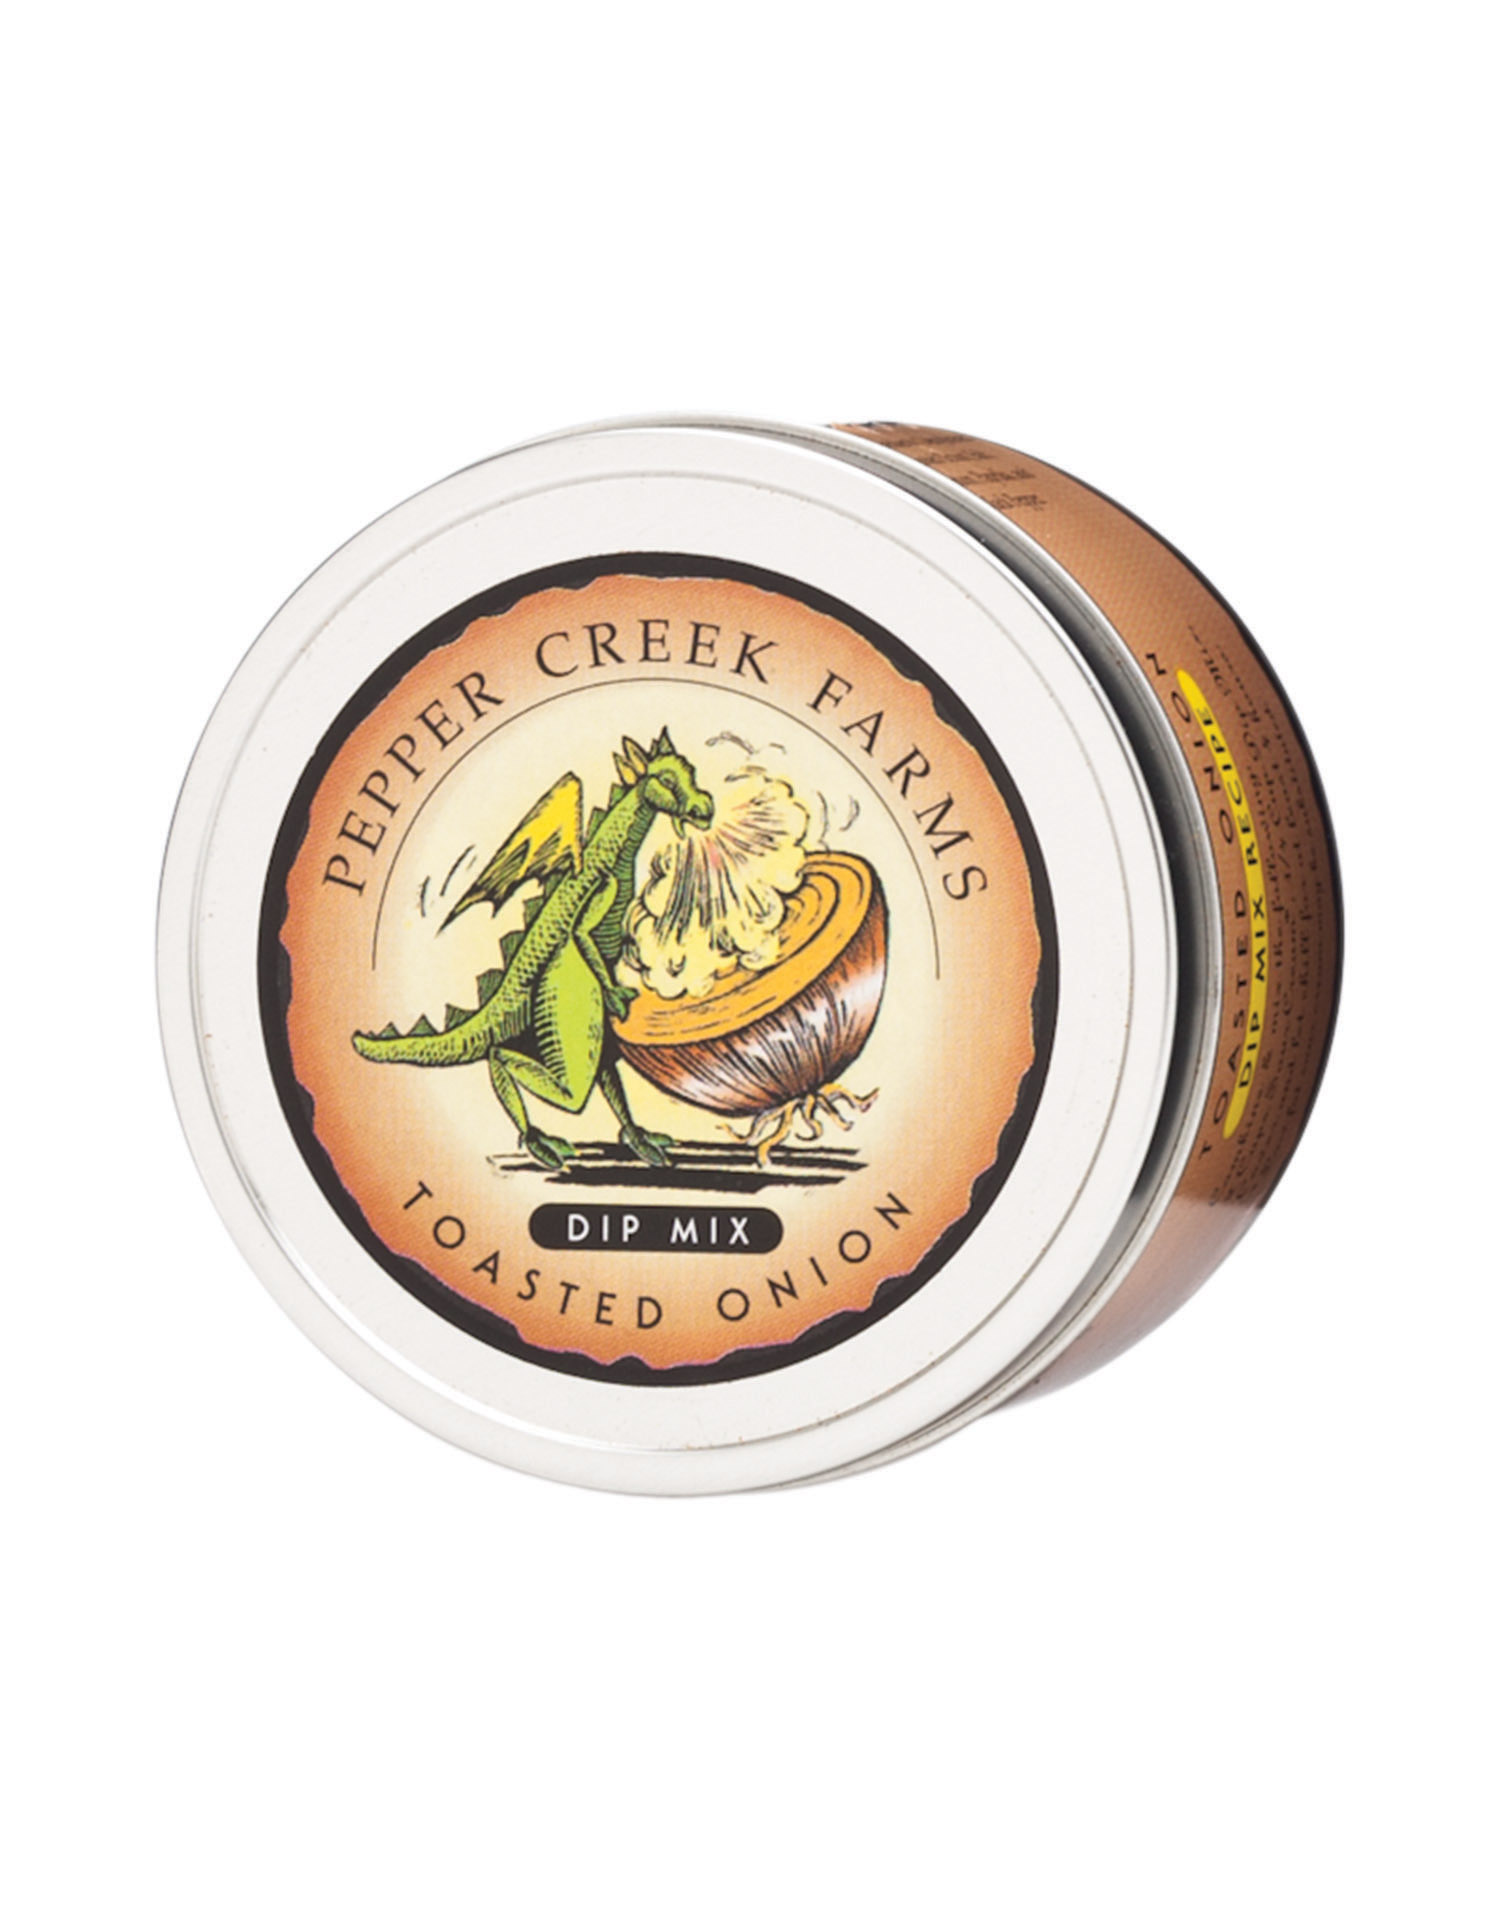 Toasted Onion Dip Mix – Large Tin – Pepper Creek Farms